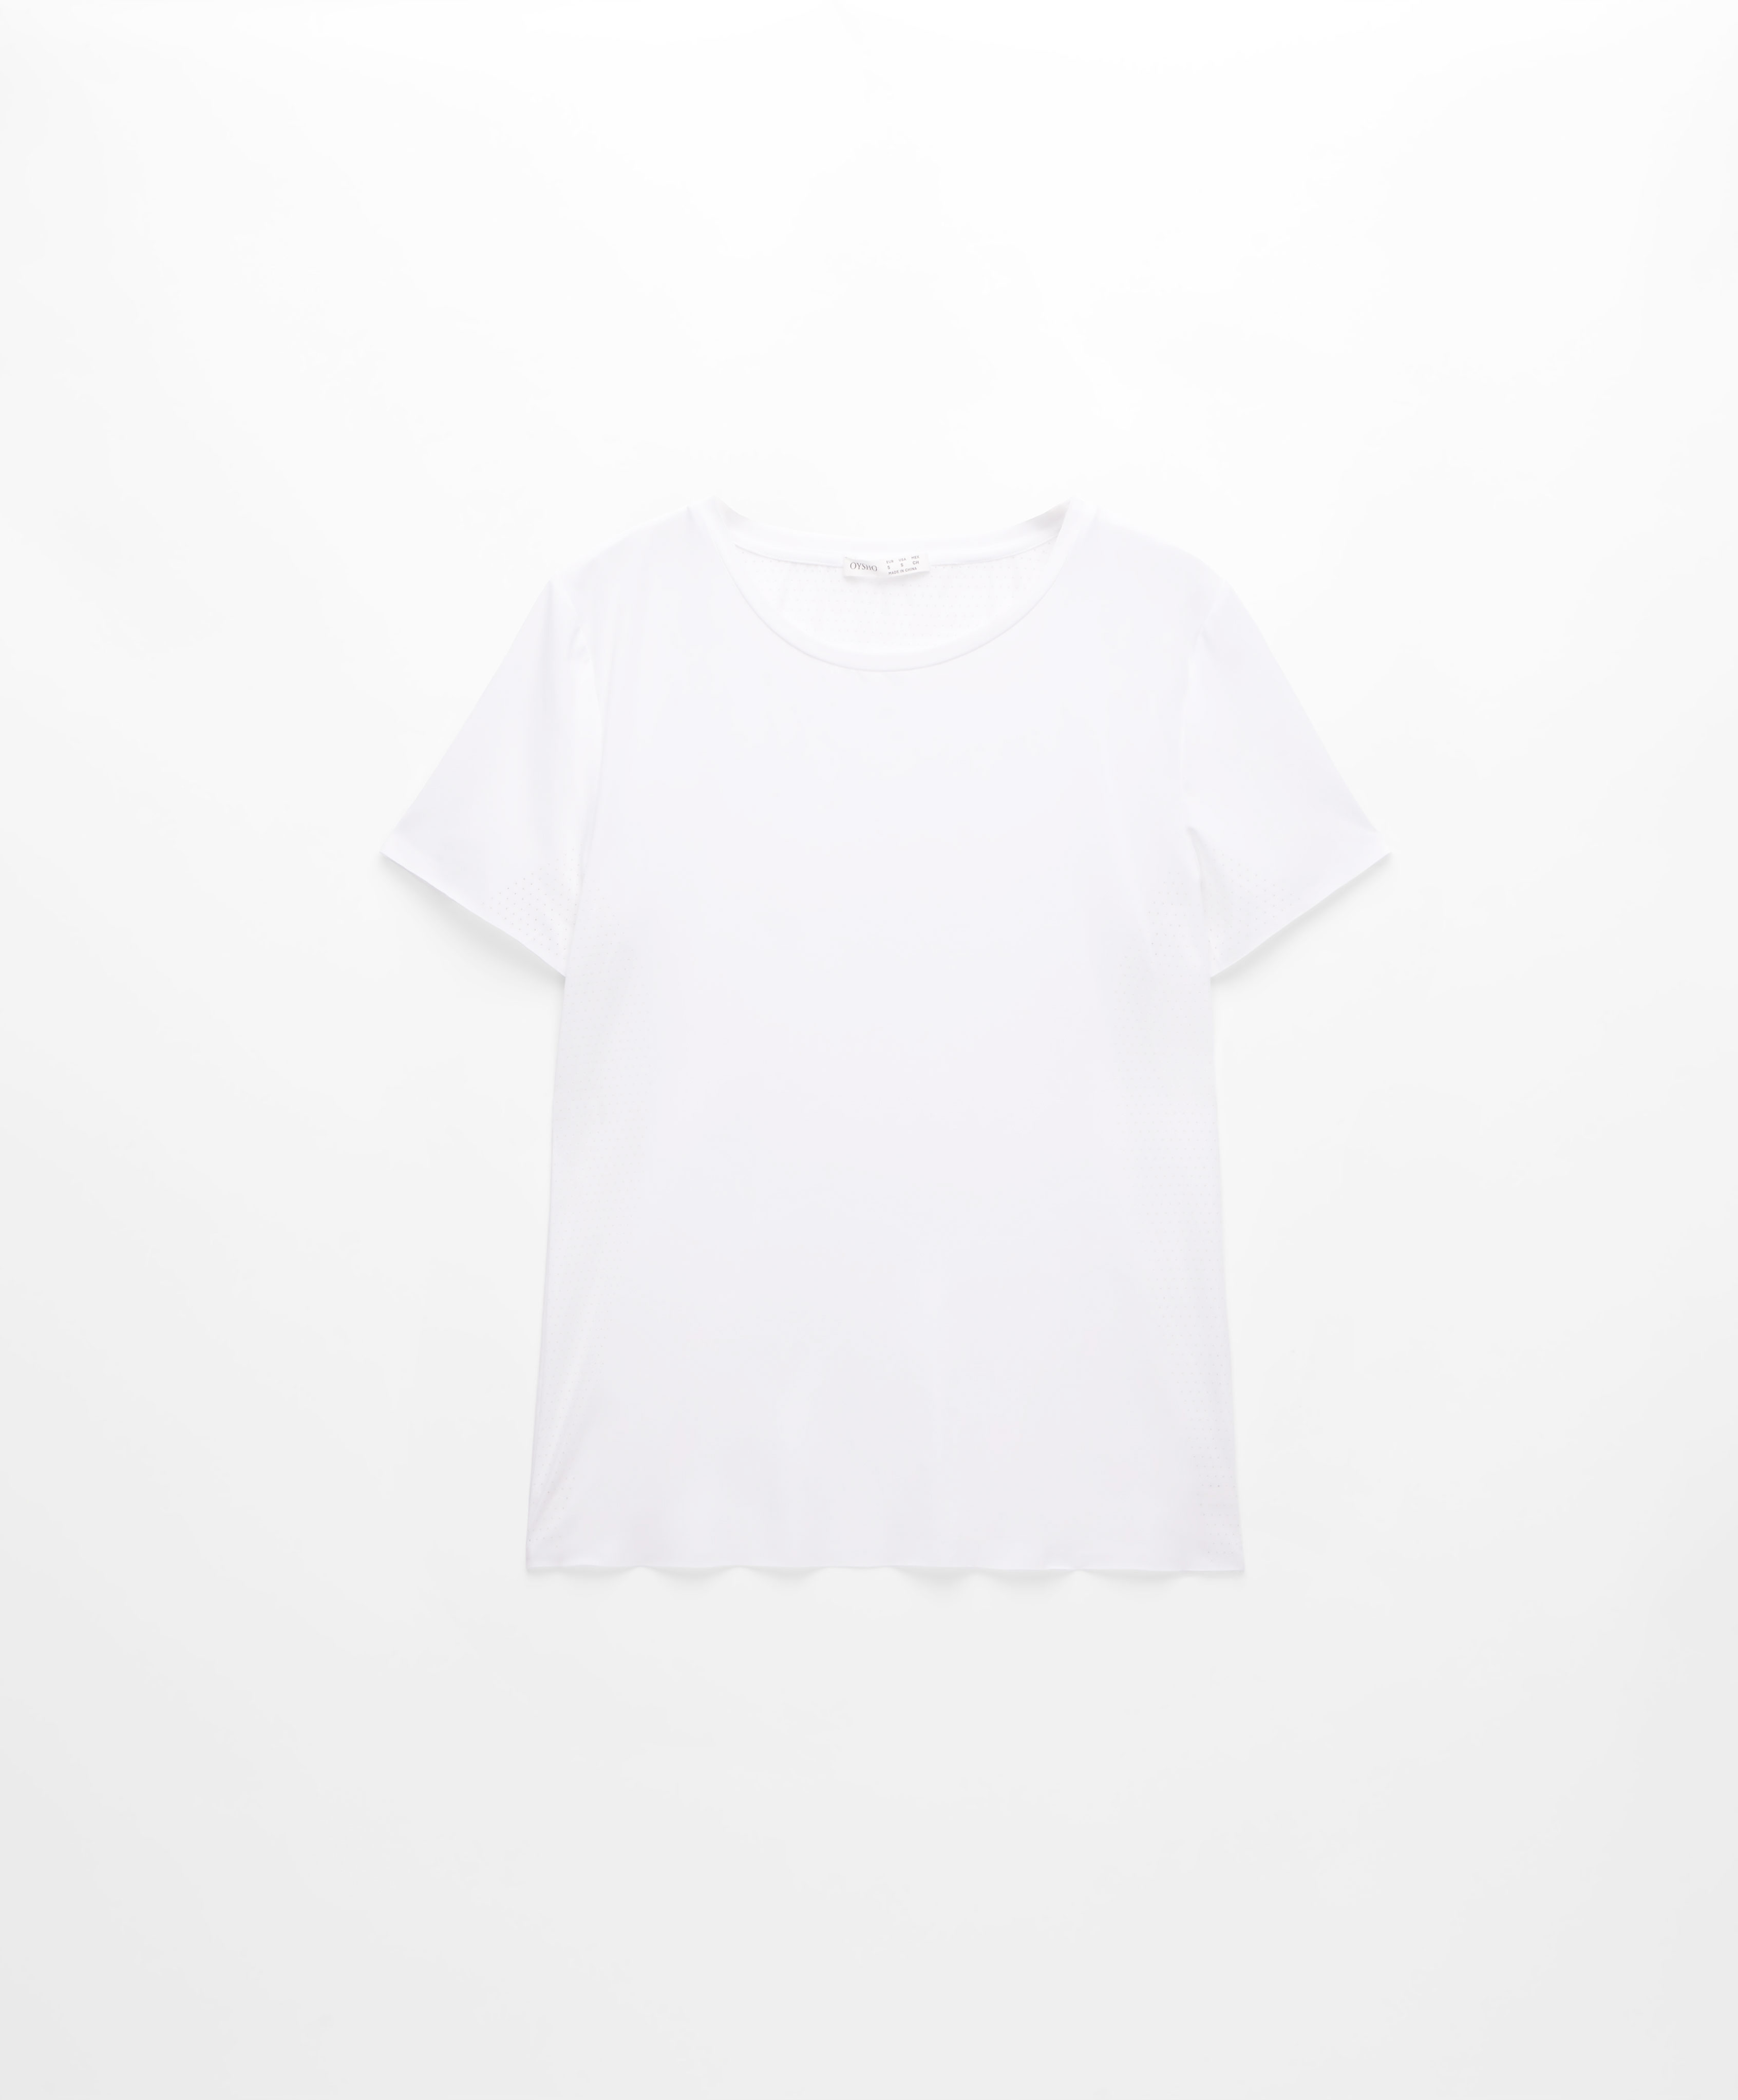 Microperforated short-sleeved technical T-shirt